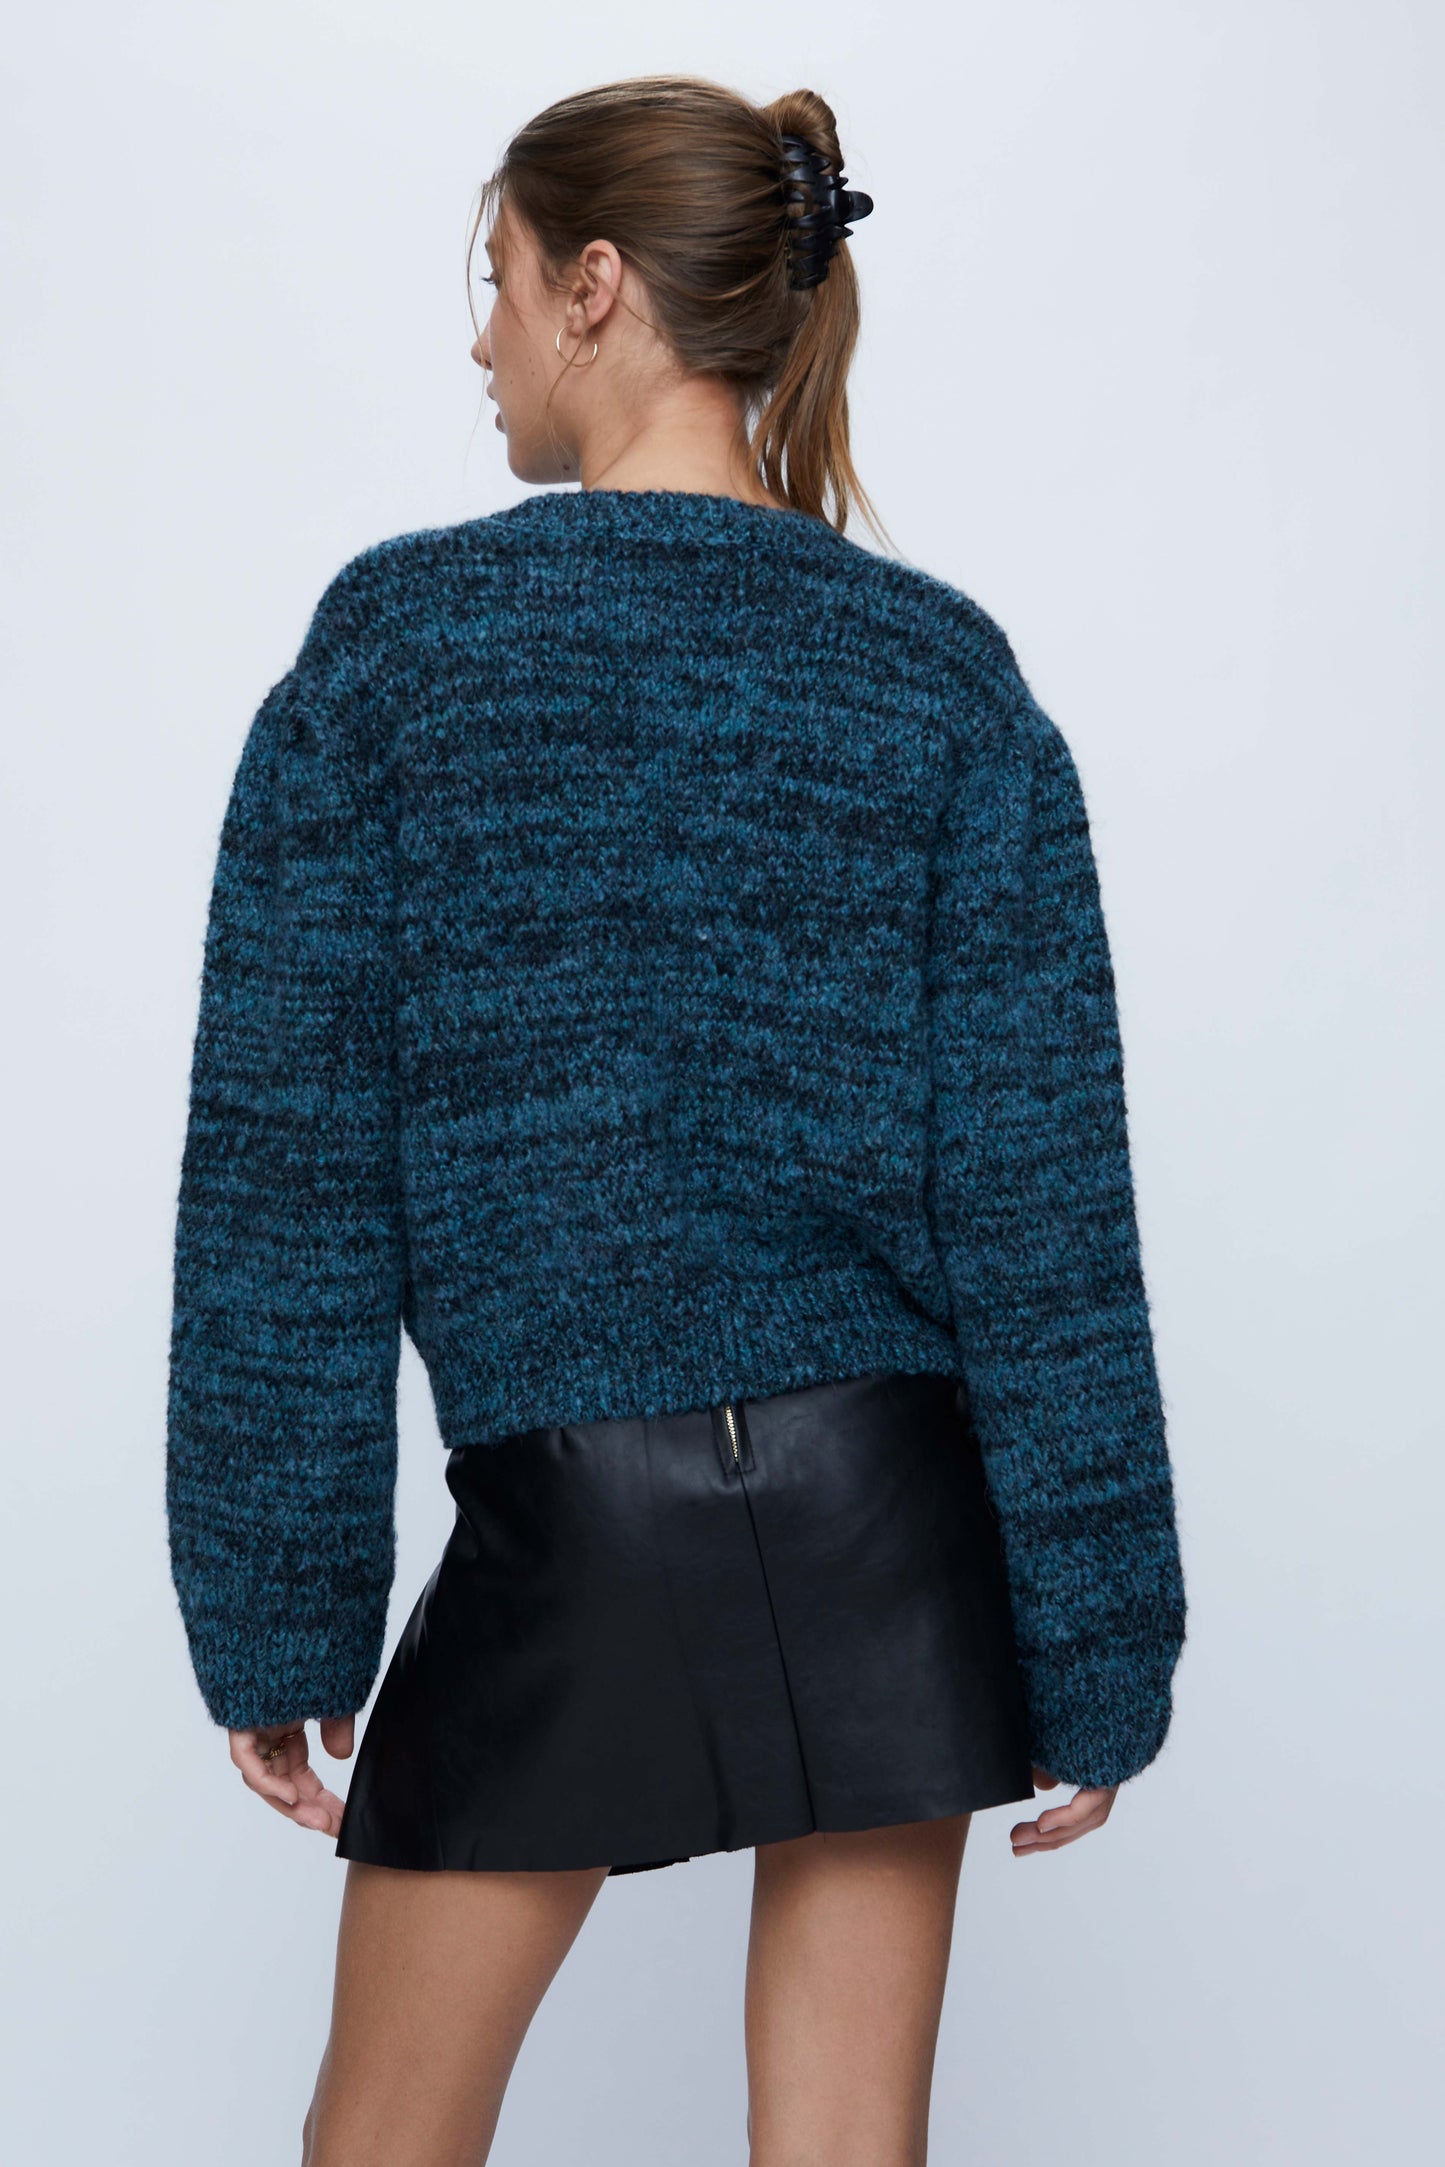 Blue Textured Knit Sweater